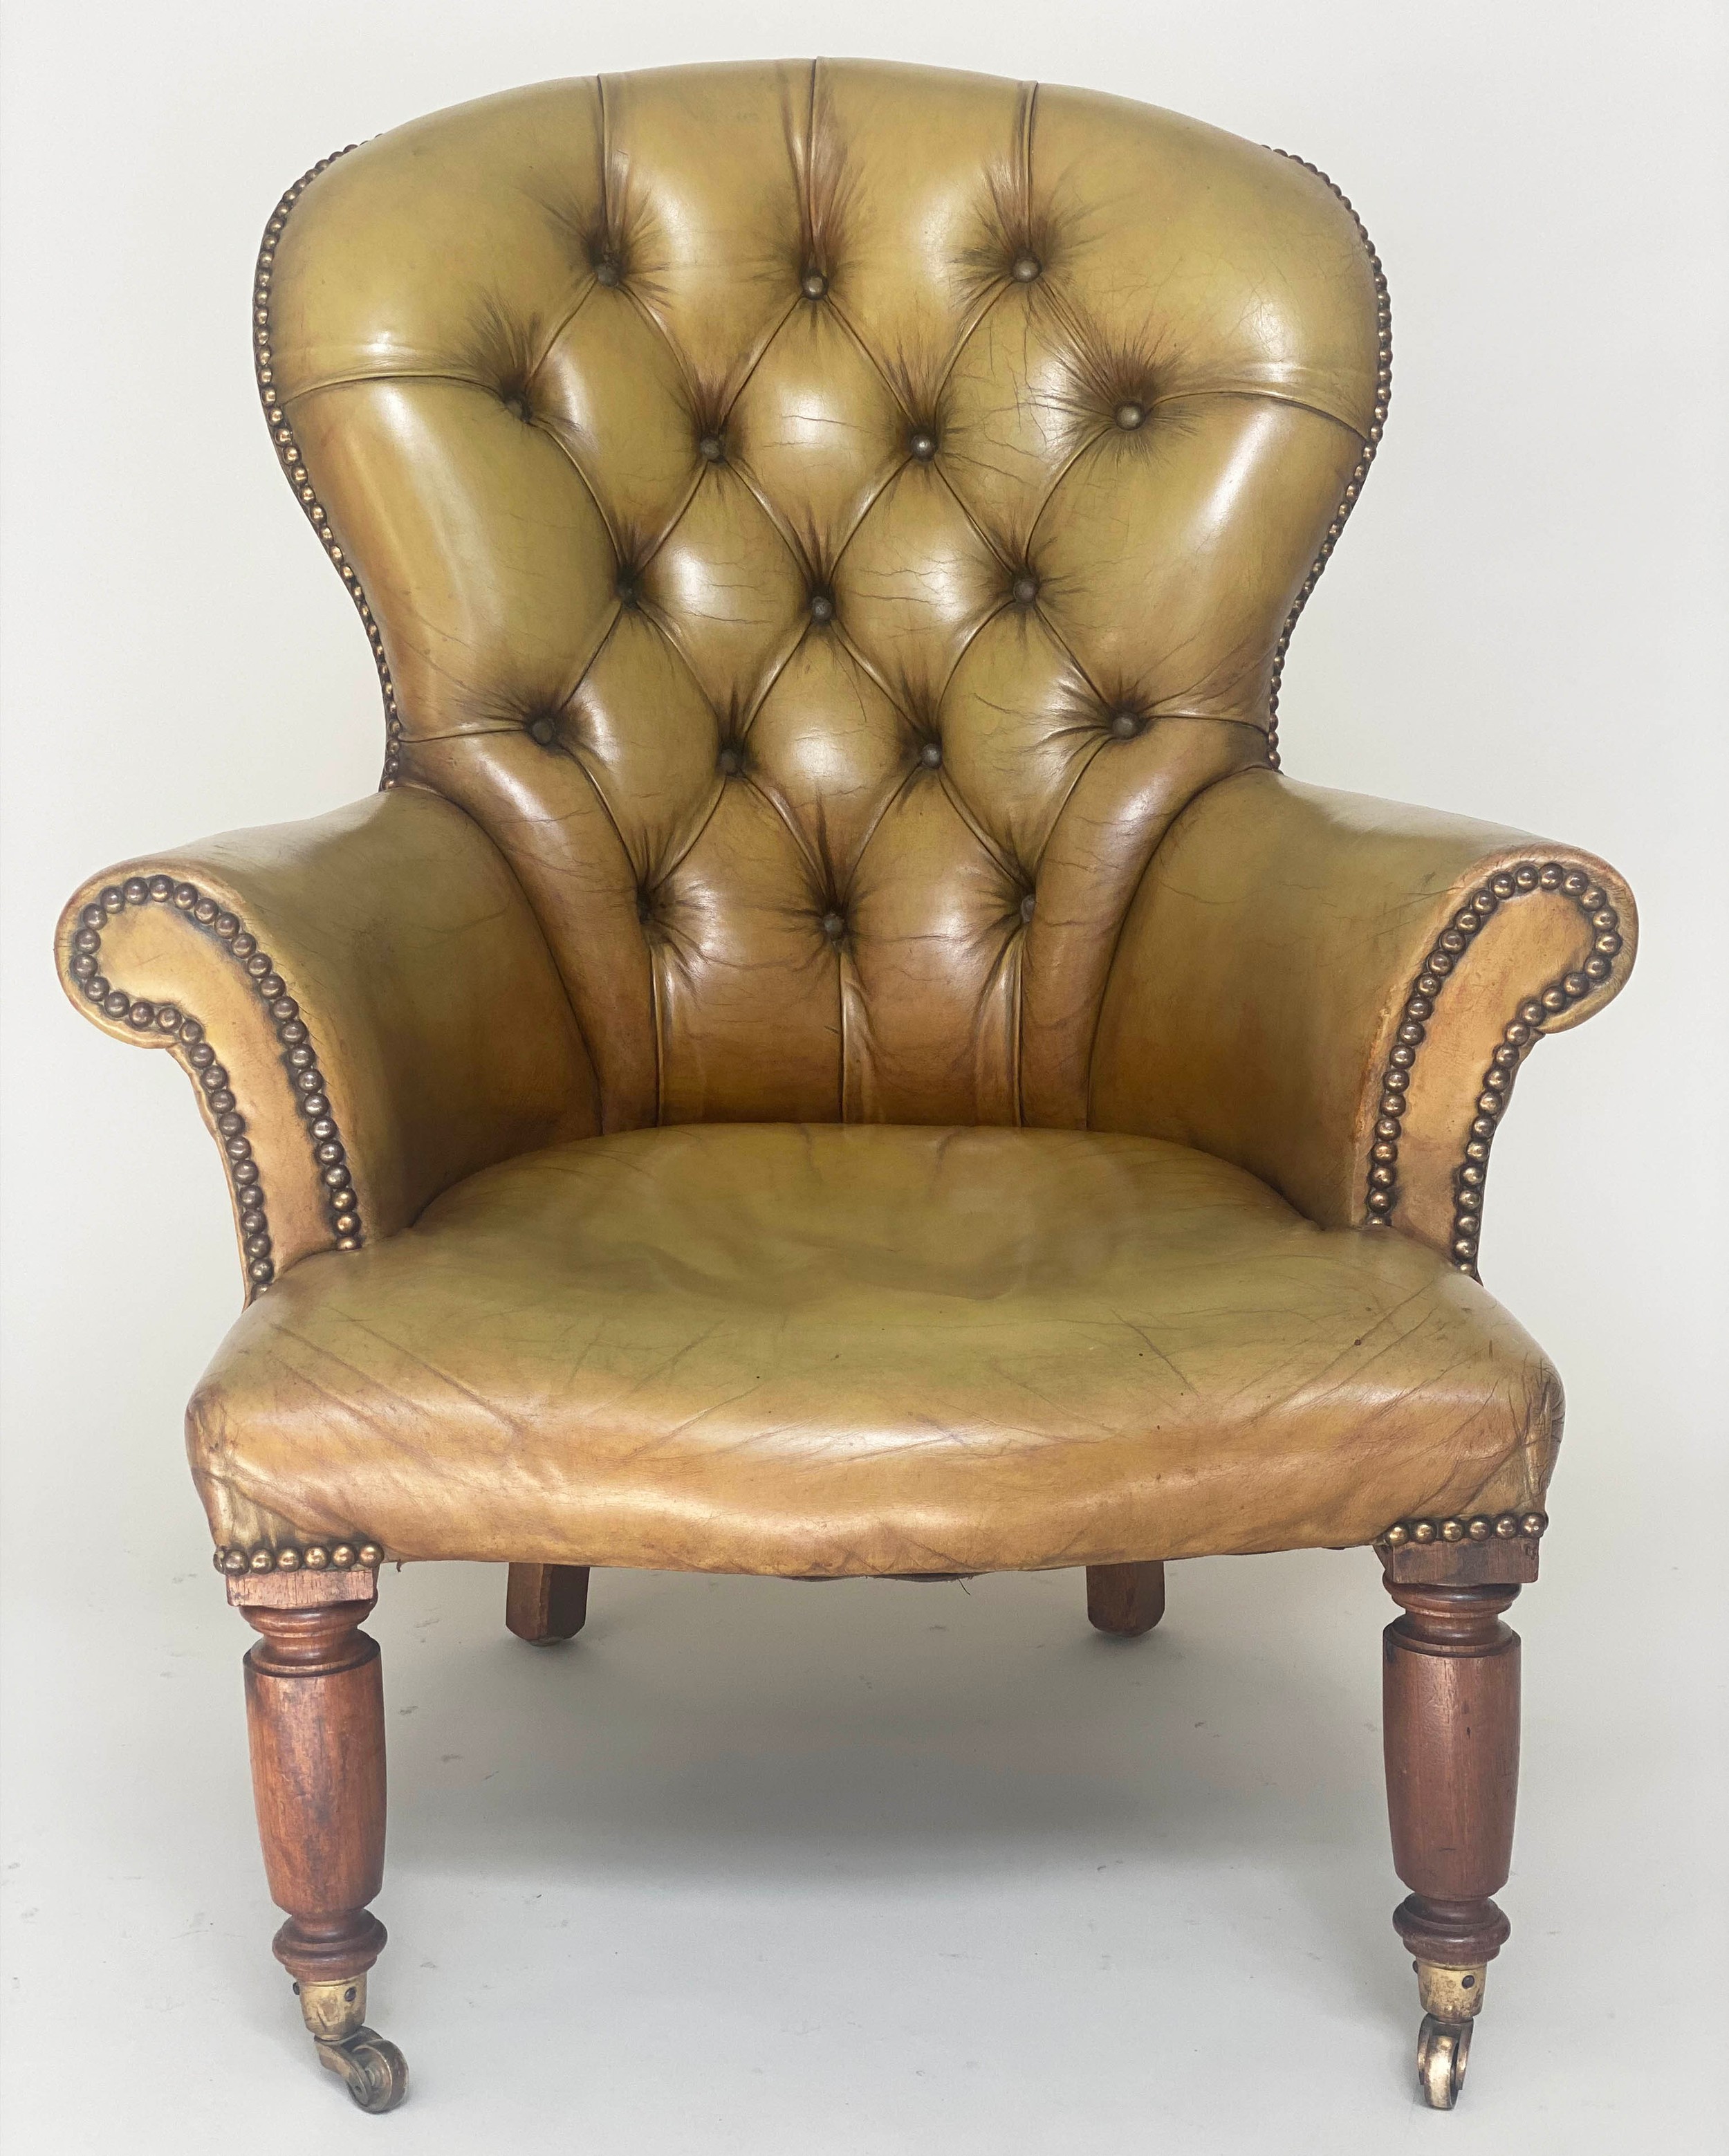 LIBRARY ARMCHAIR, Edwardian mahogany with brass studded and deep buttoned green leather upholstery - Image 7 of 10